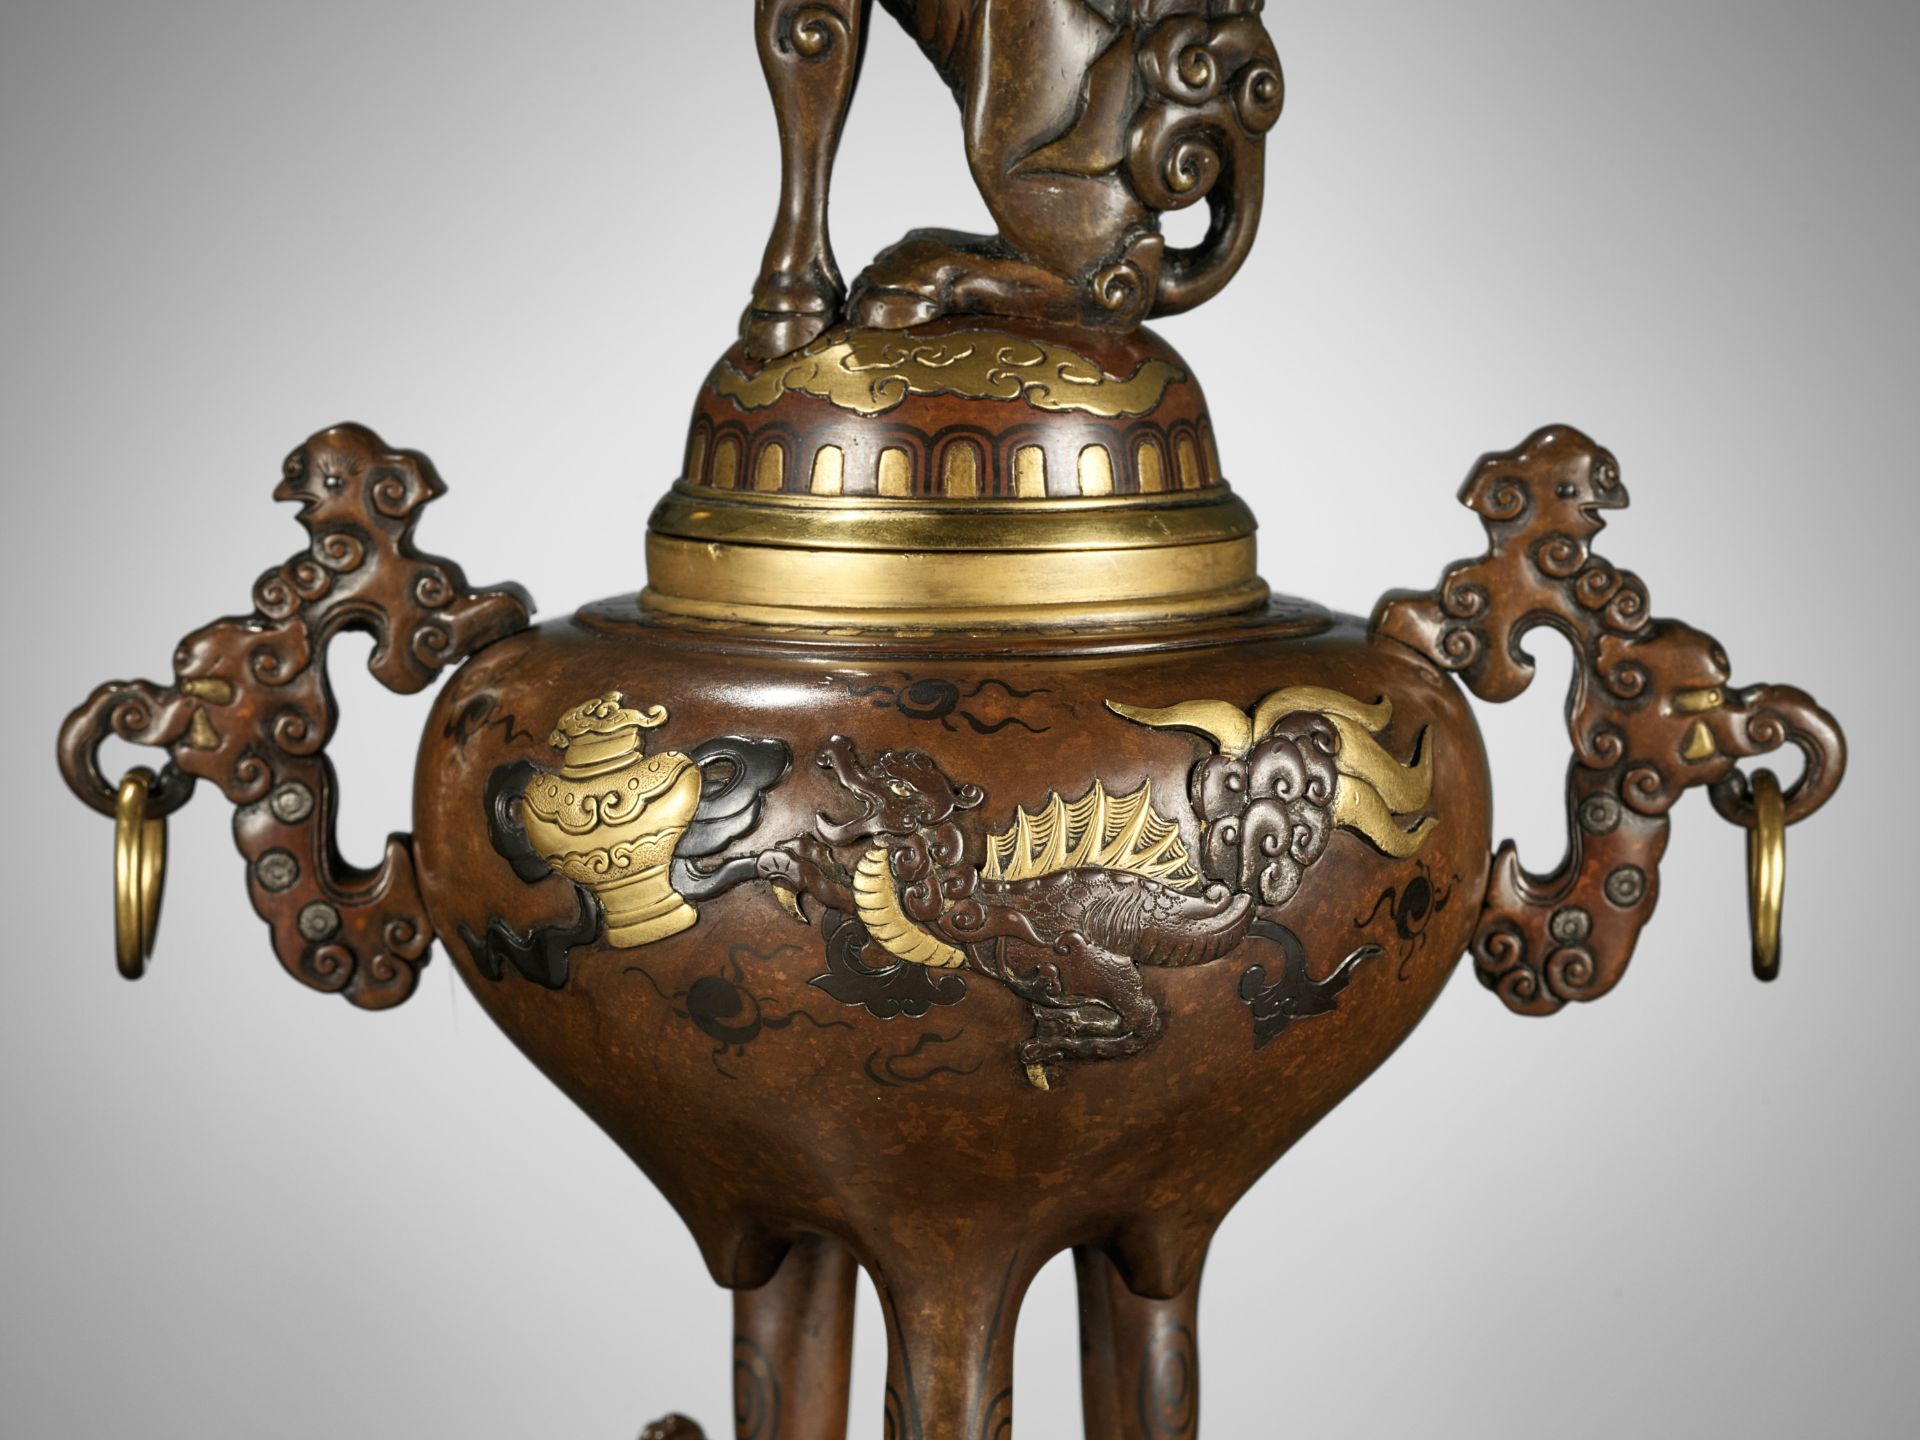 A PAIR OF SUPERB GOLD-INLAID BRONZE 'MYTHICAL BEASTS' KORO (INCENSE BURNERS) AND COVERS - Image 7 of 20